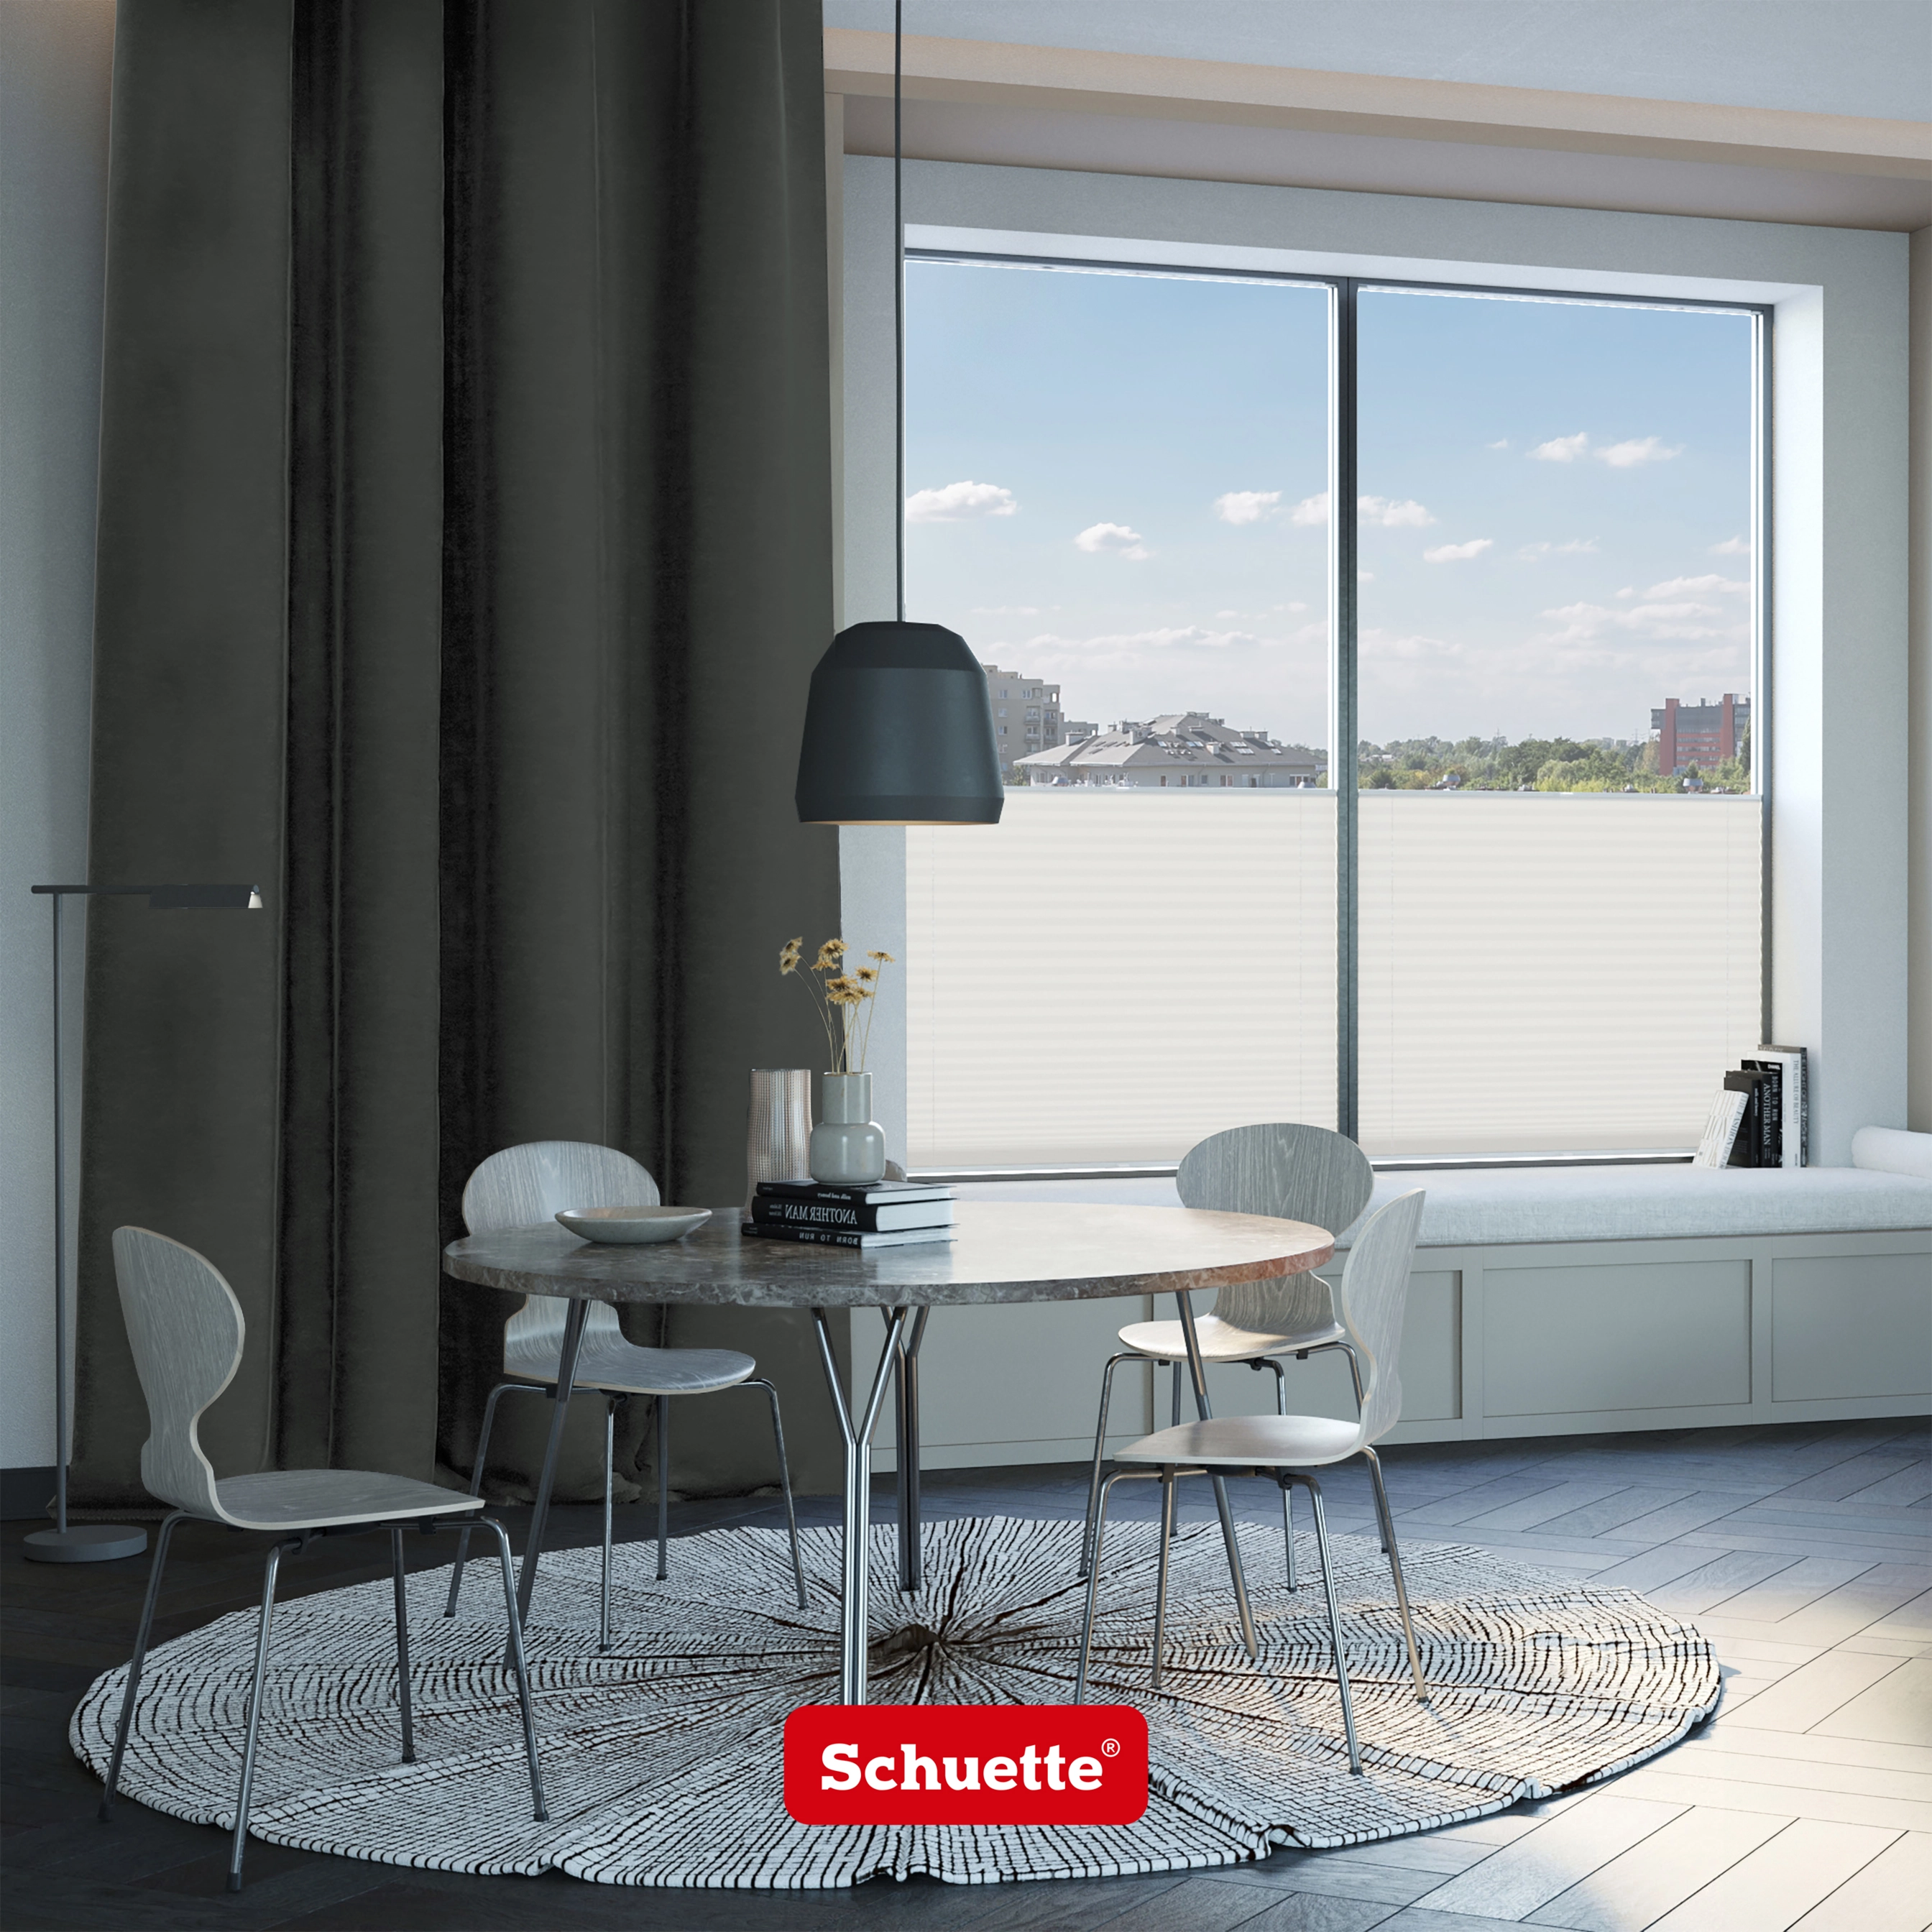 Schuette® Blackout Curtain with Eyelets ● Millenium Velvet Collection: Dark Shadow (Grey) ● 1 piece ● Crease-resistant Easy-care Thermo Opaque & heavily darkening